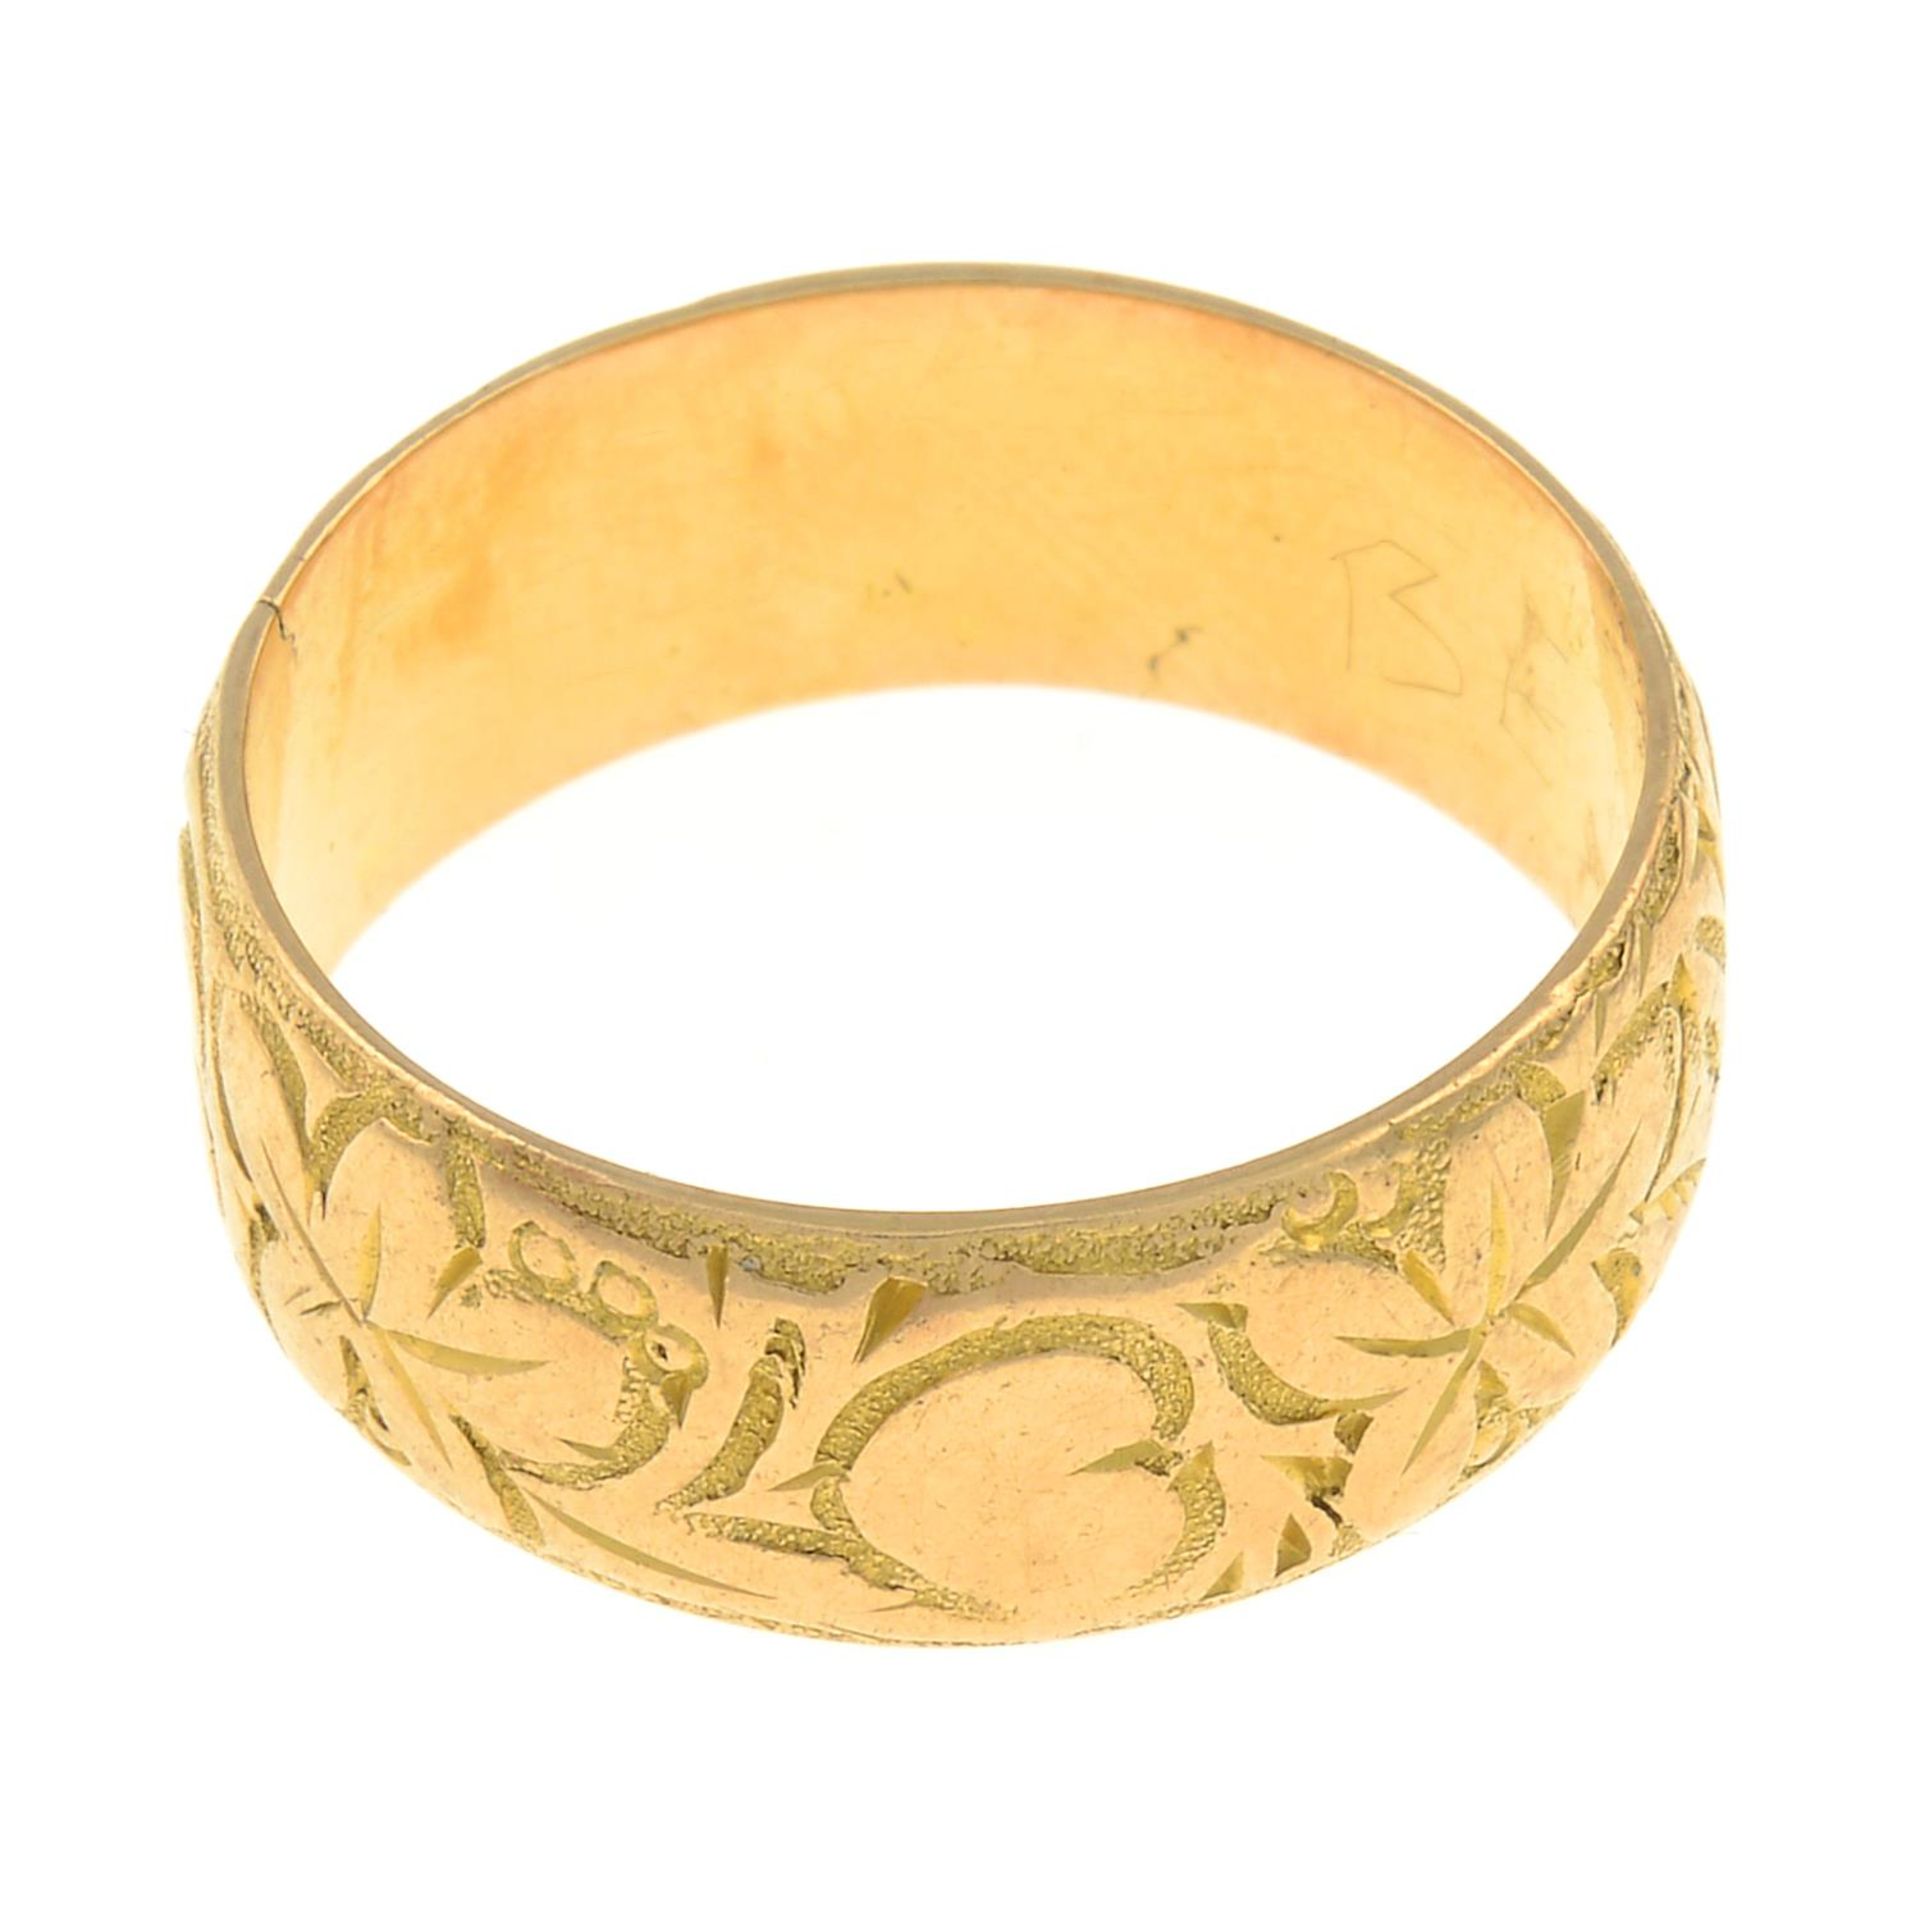 An early 20th century 18ct gold engraved band ring.Hallmarks for Birmingham, 1915.